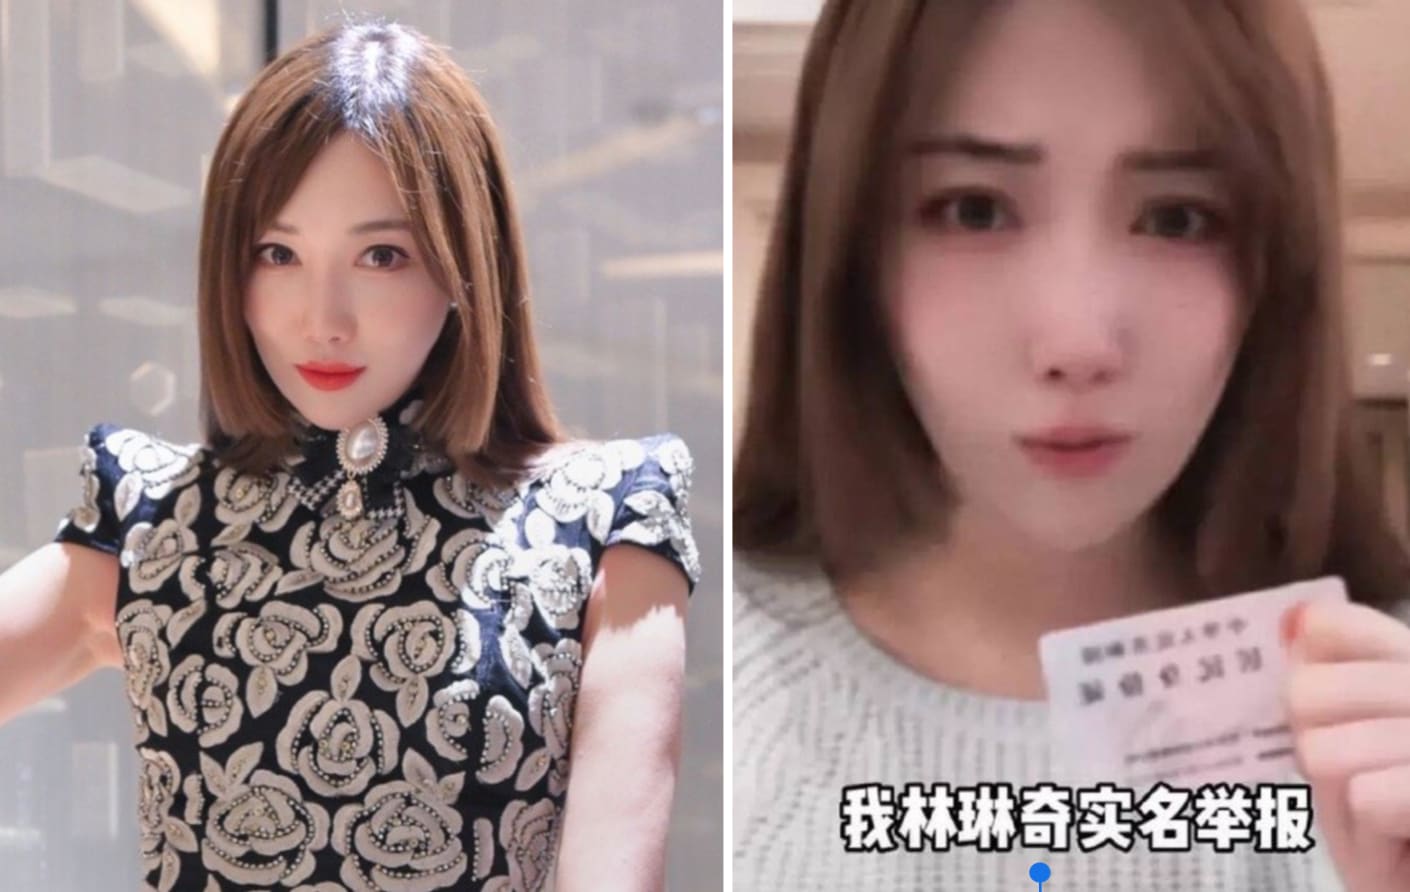 Jackie Chan's Protégé Trapped In Hotel Bathroom For 4 Hours; Freed Herself With 2 Things She Found There